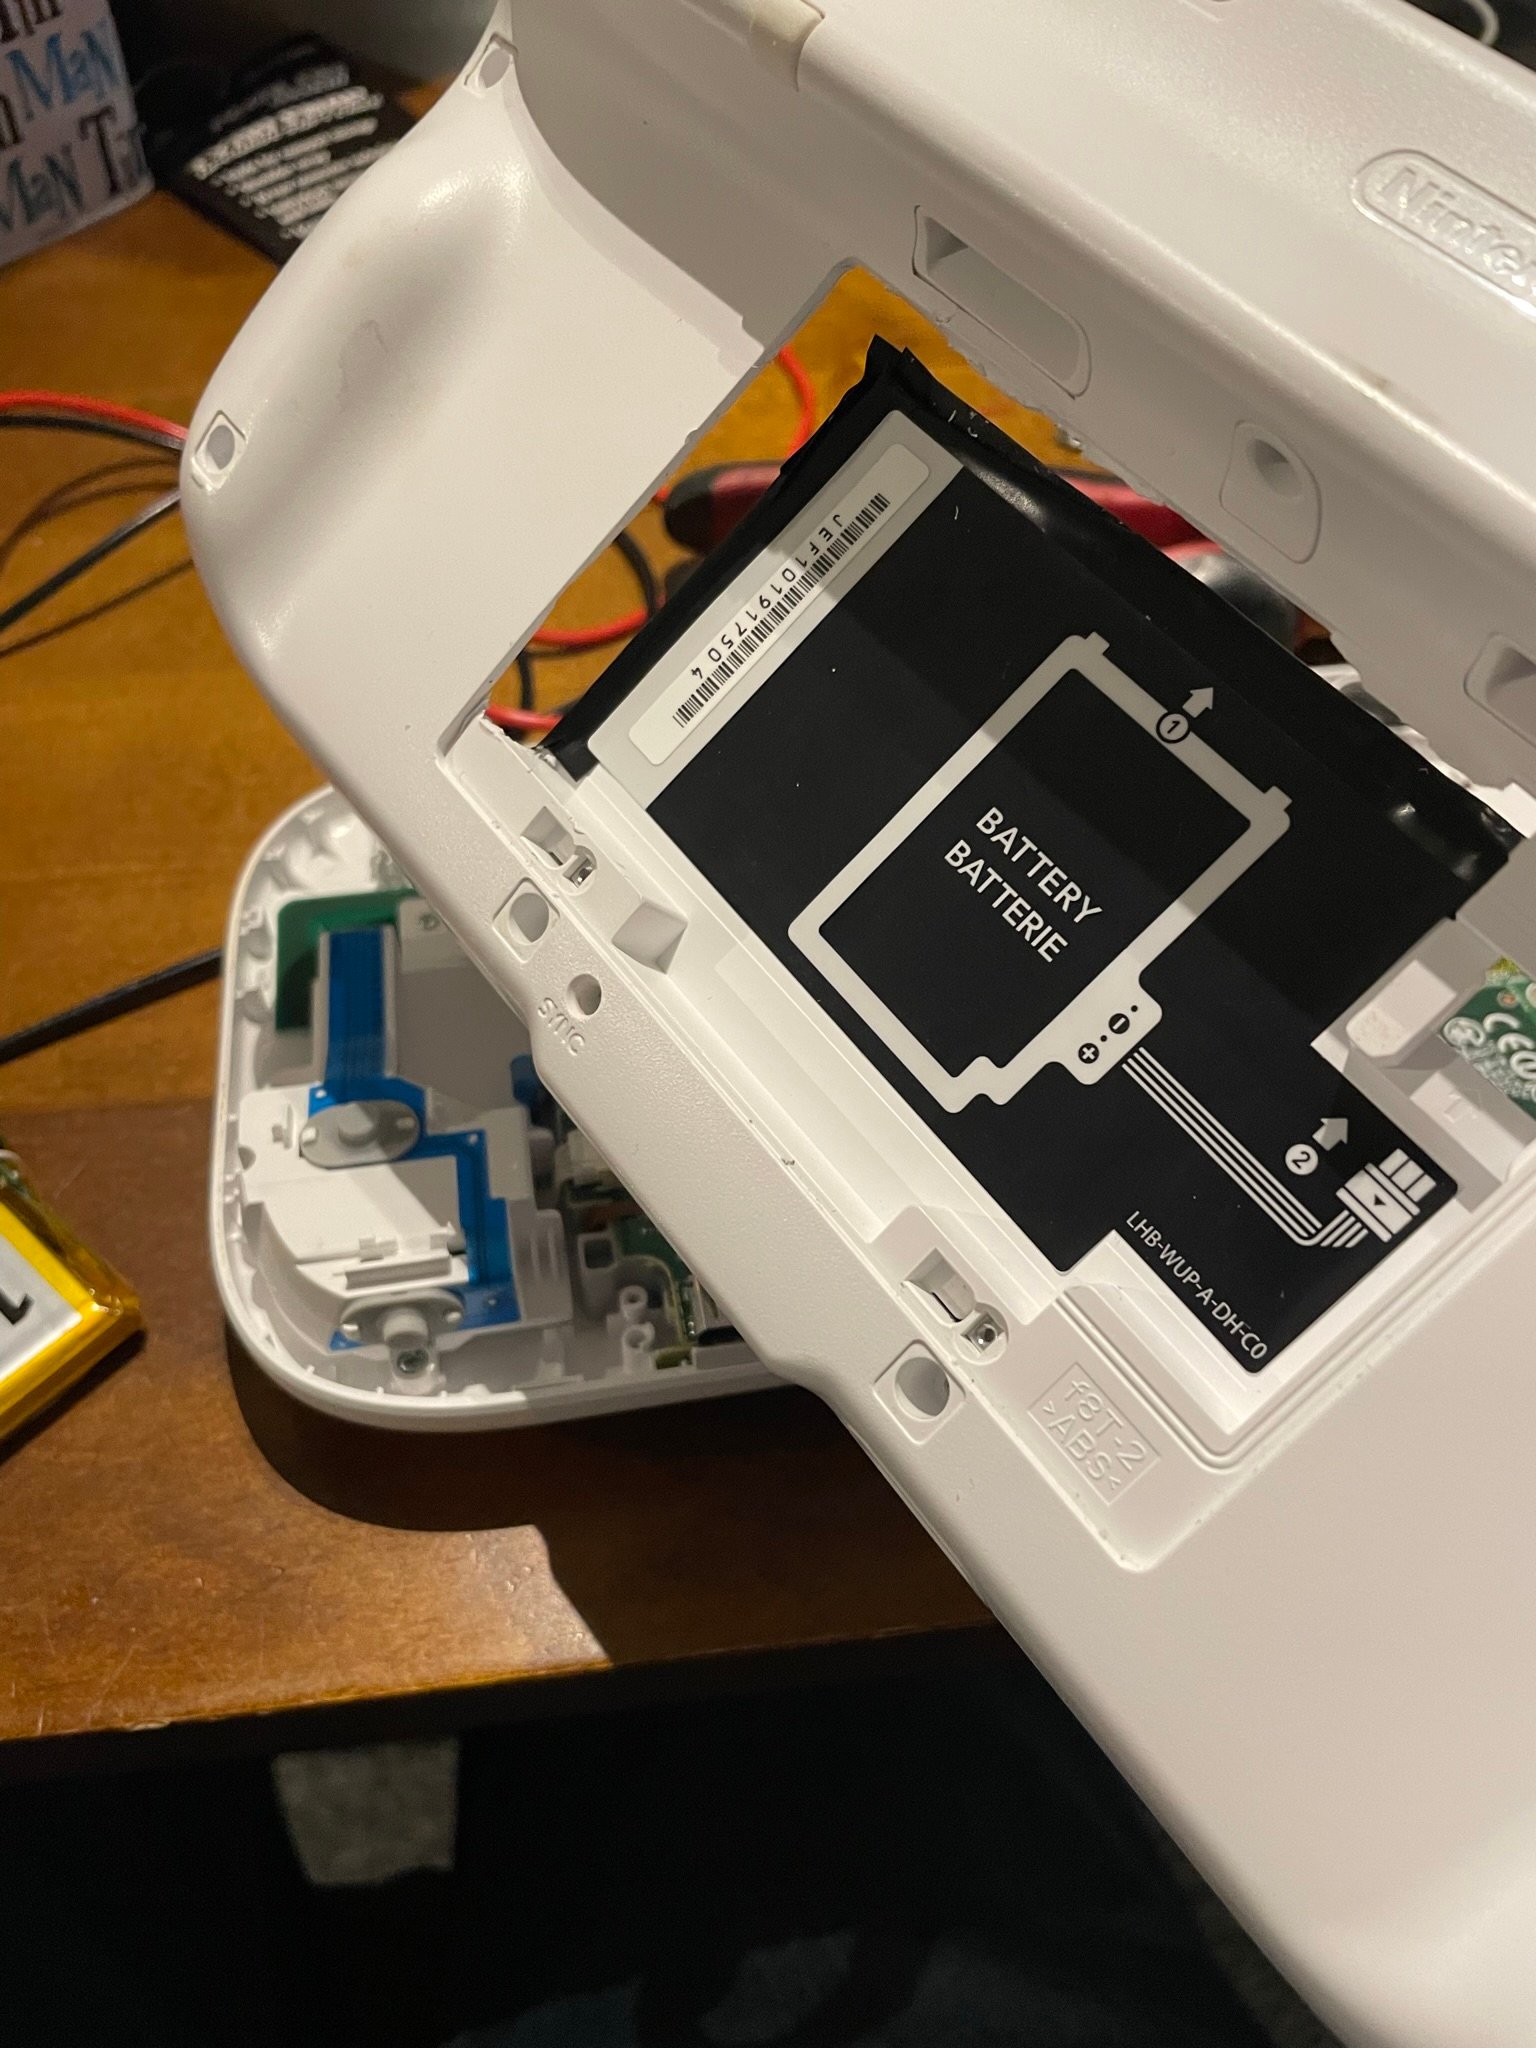 Wii U Controller - 10,000mAh Internal Battery Mod   - The  Independent Video Game Community